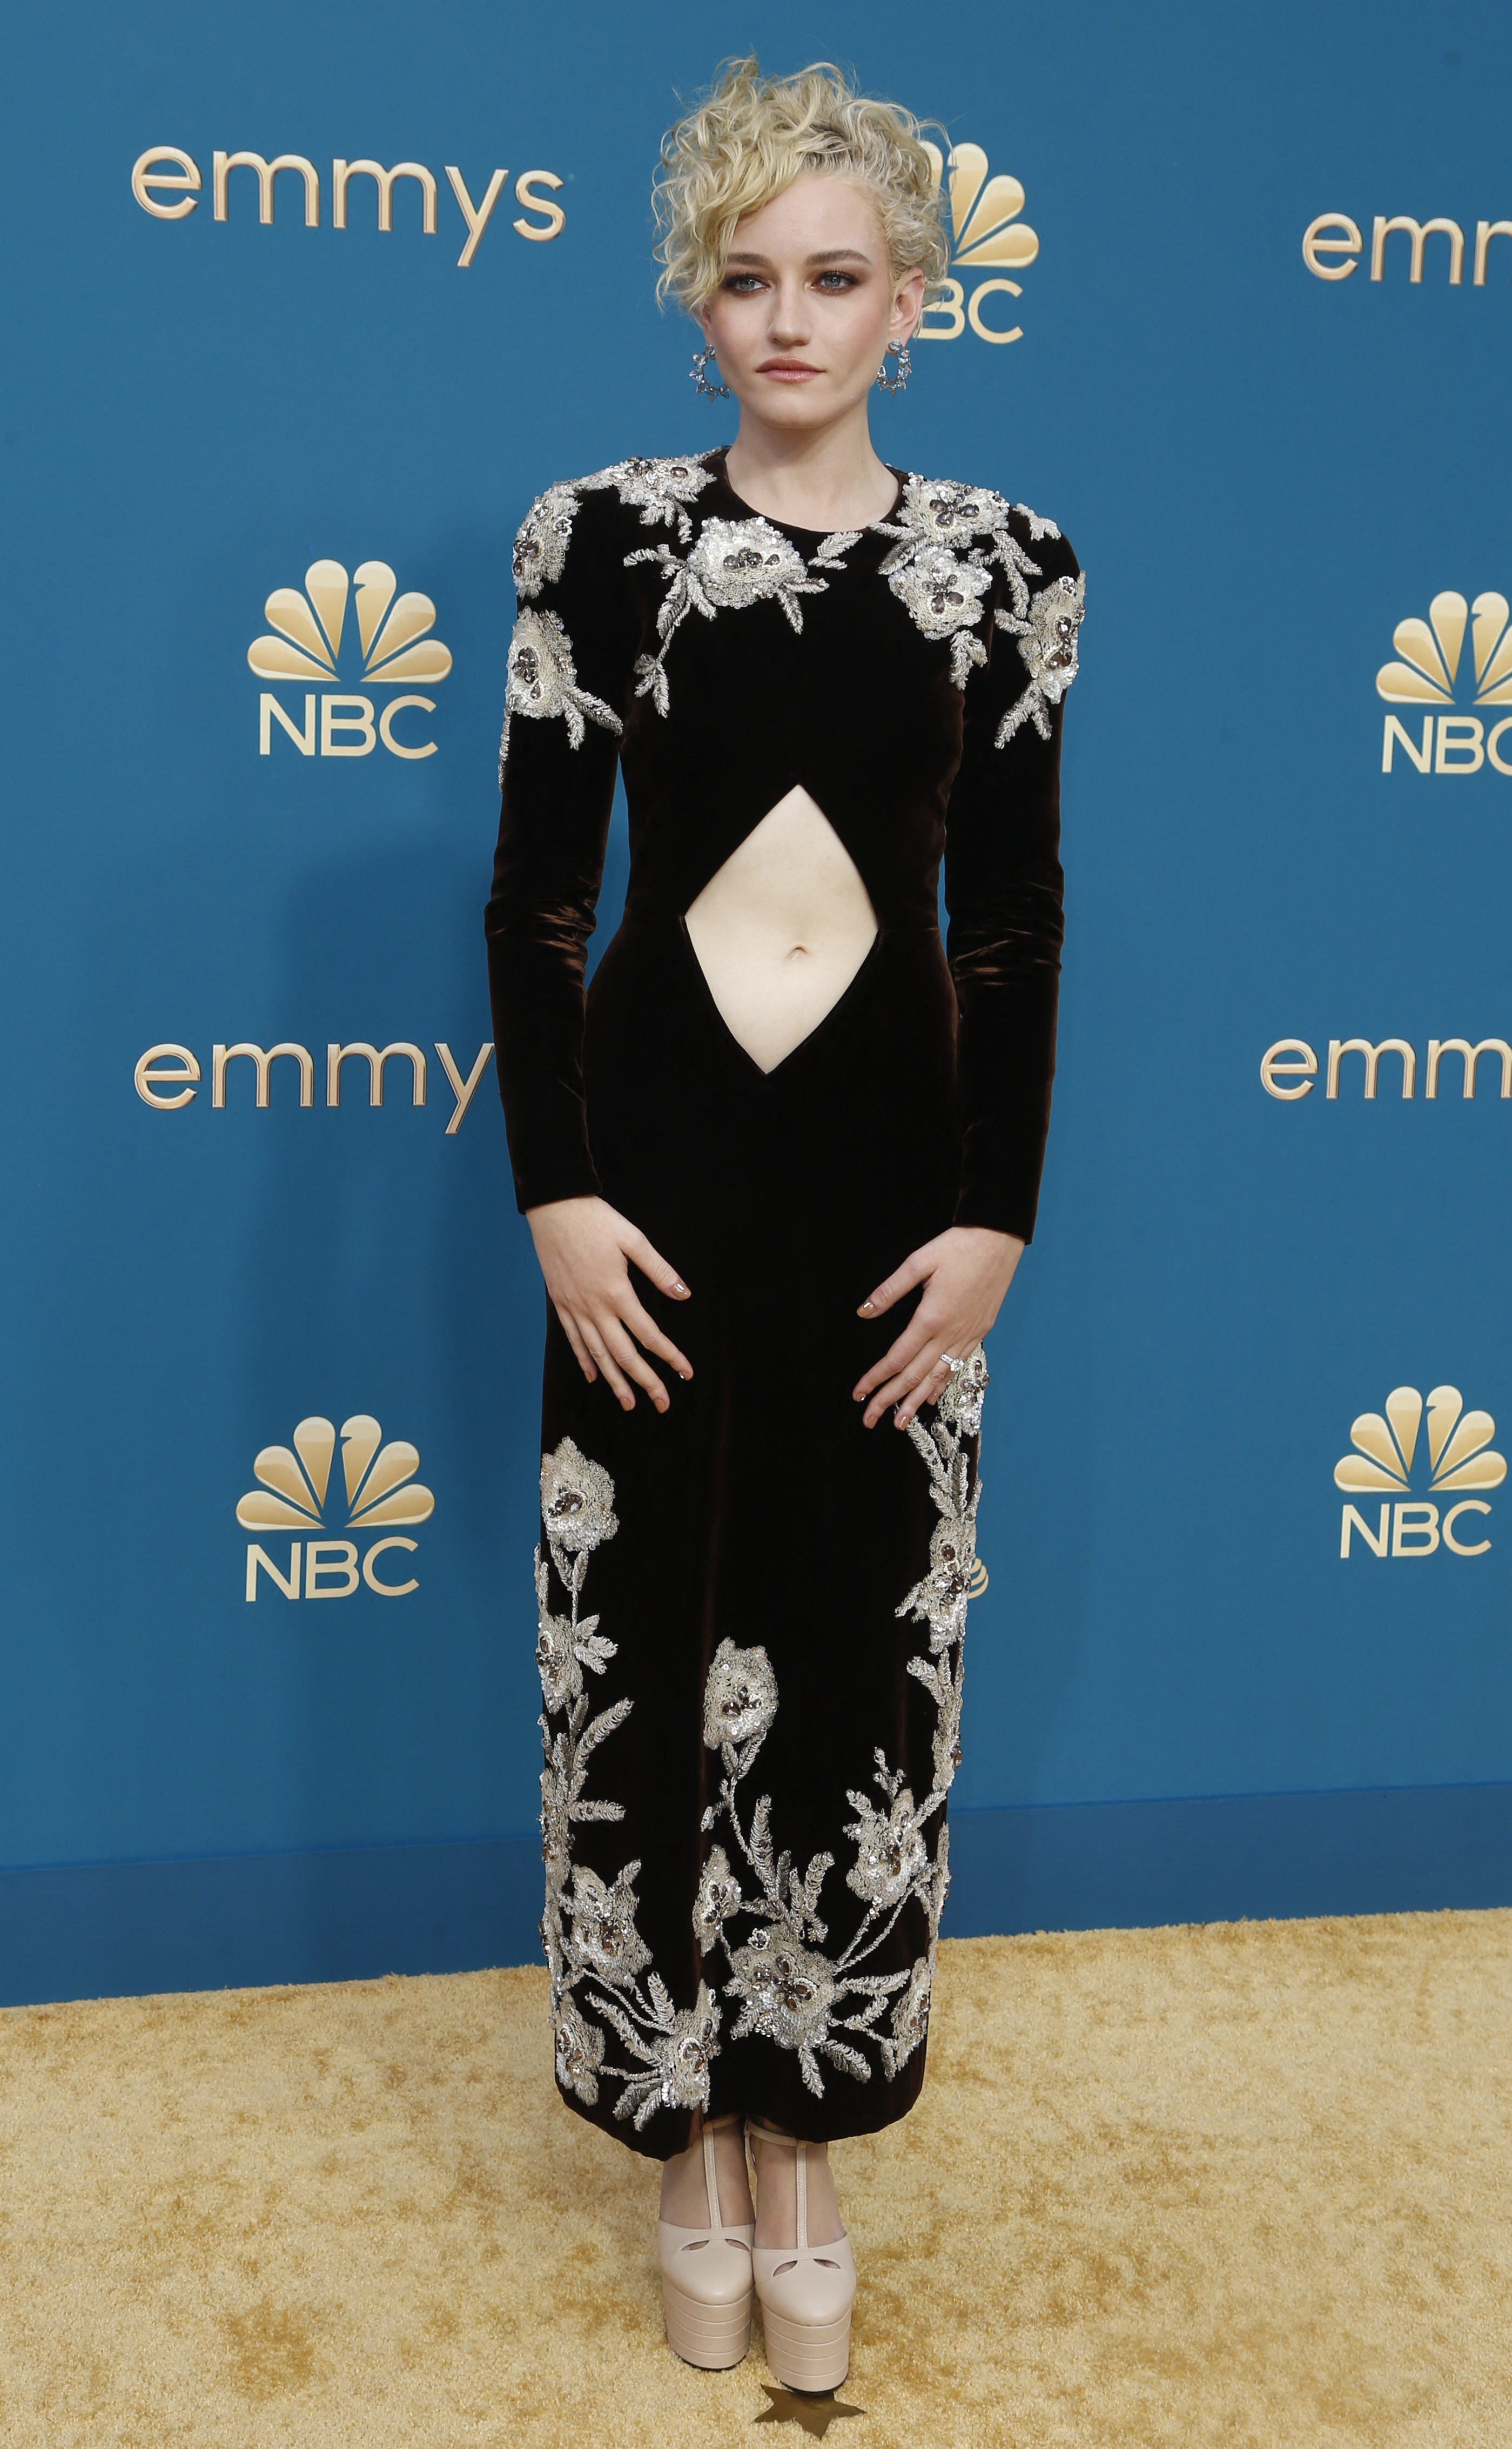 Julia Garner wearing a long-sleeve black gown with embellished flowers and a diamond-shaped cutout at the belly button